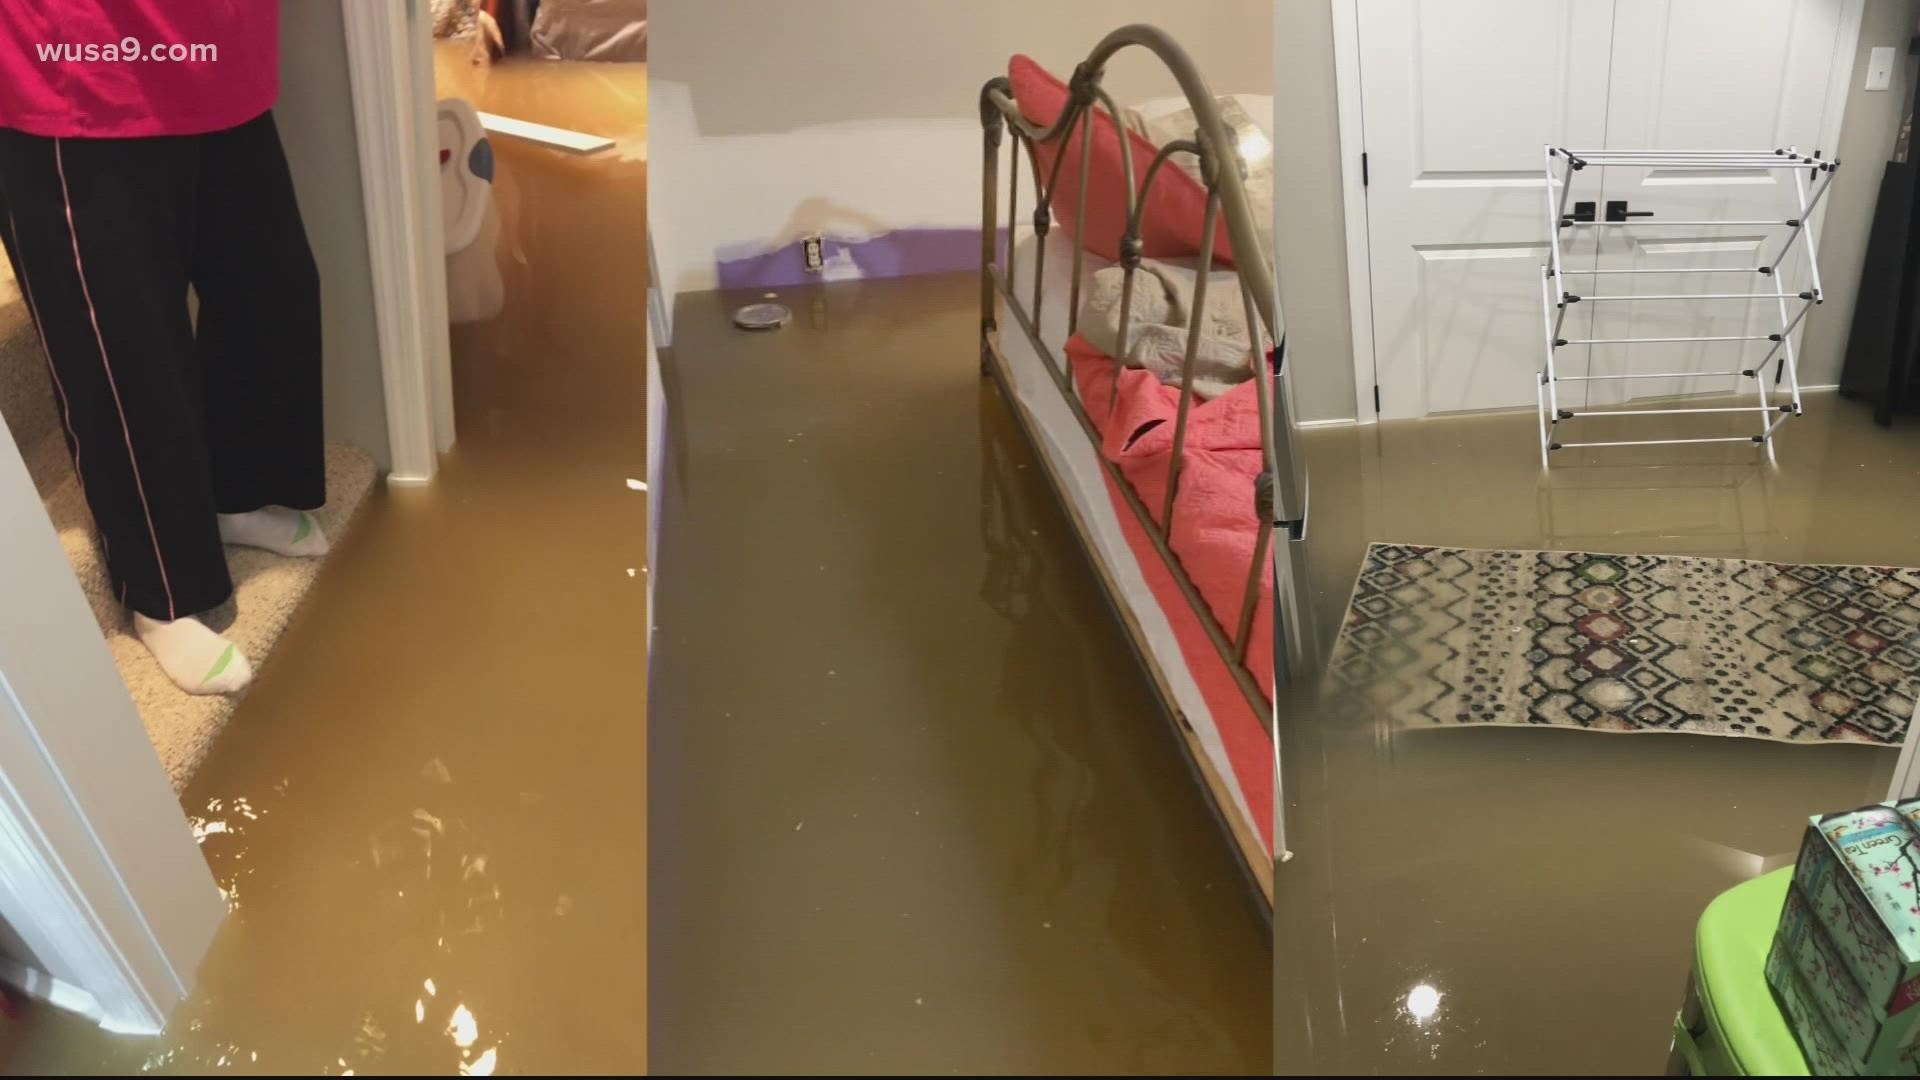 One neighbor said this is the fourth time her basement has flooded in three years -- and she wants the city to take immediate action.